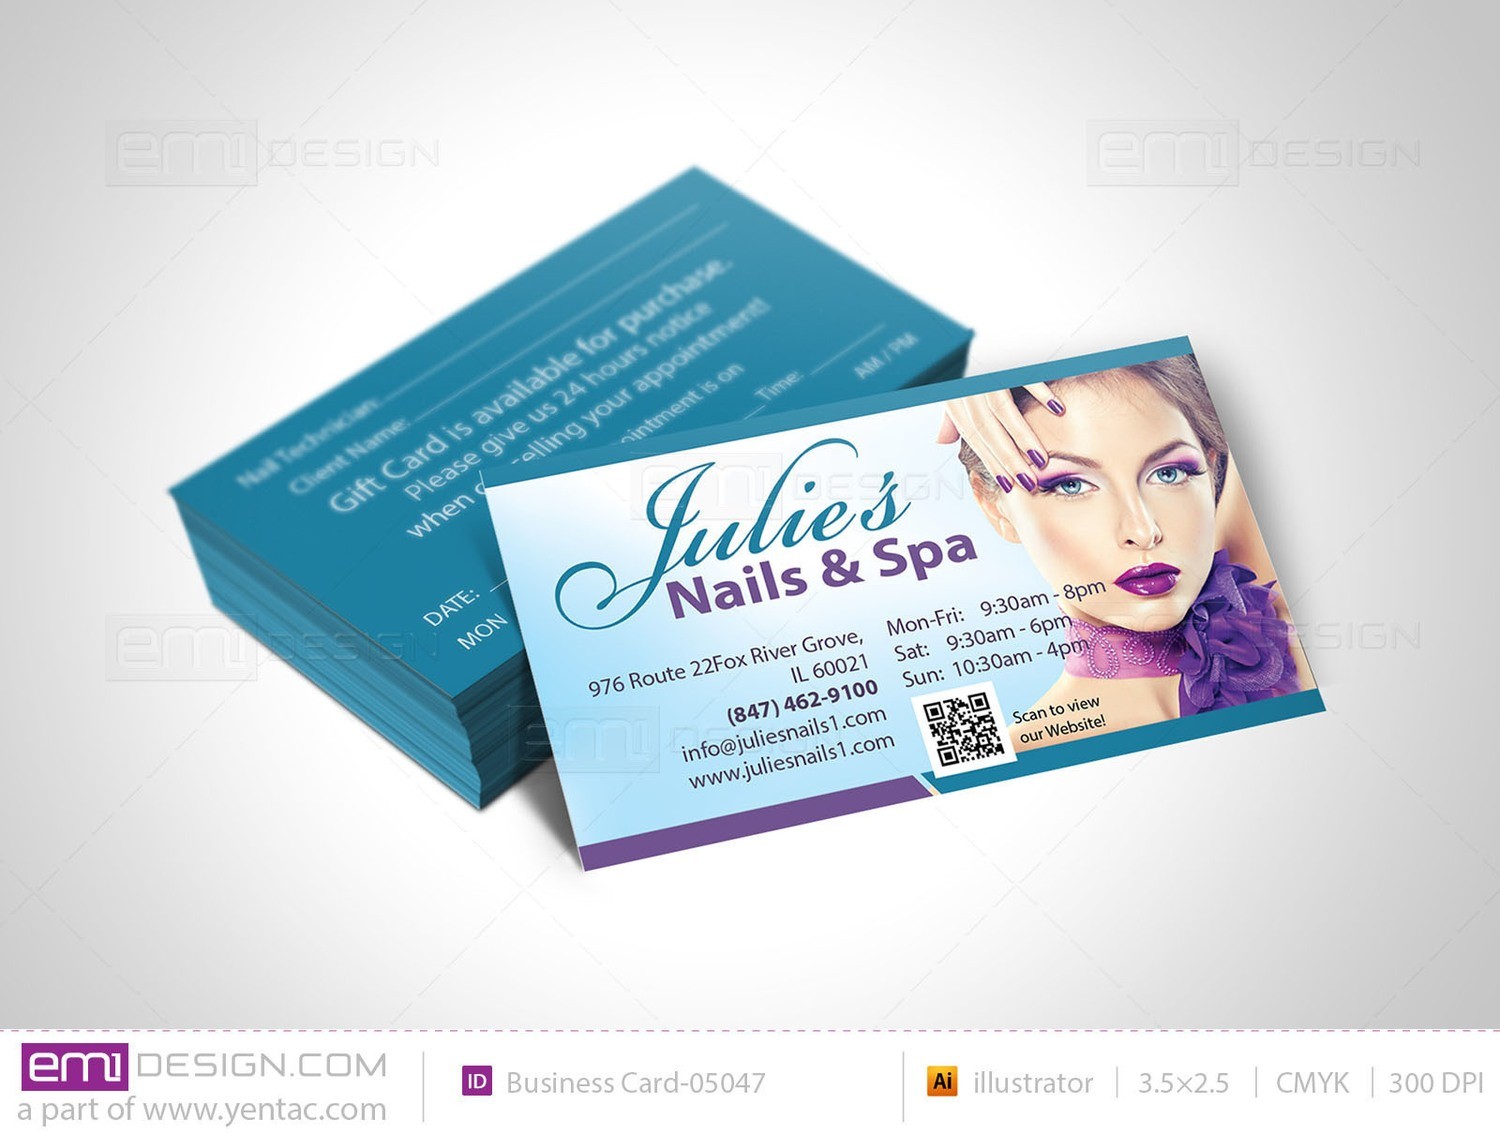 Business Card - Template buscard-05047 - Julie Nails